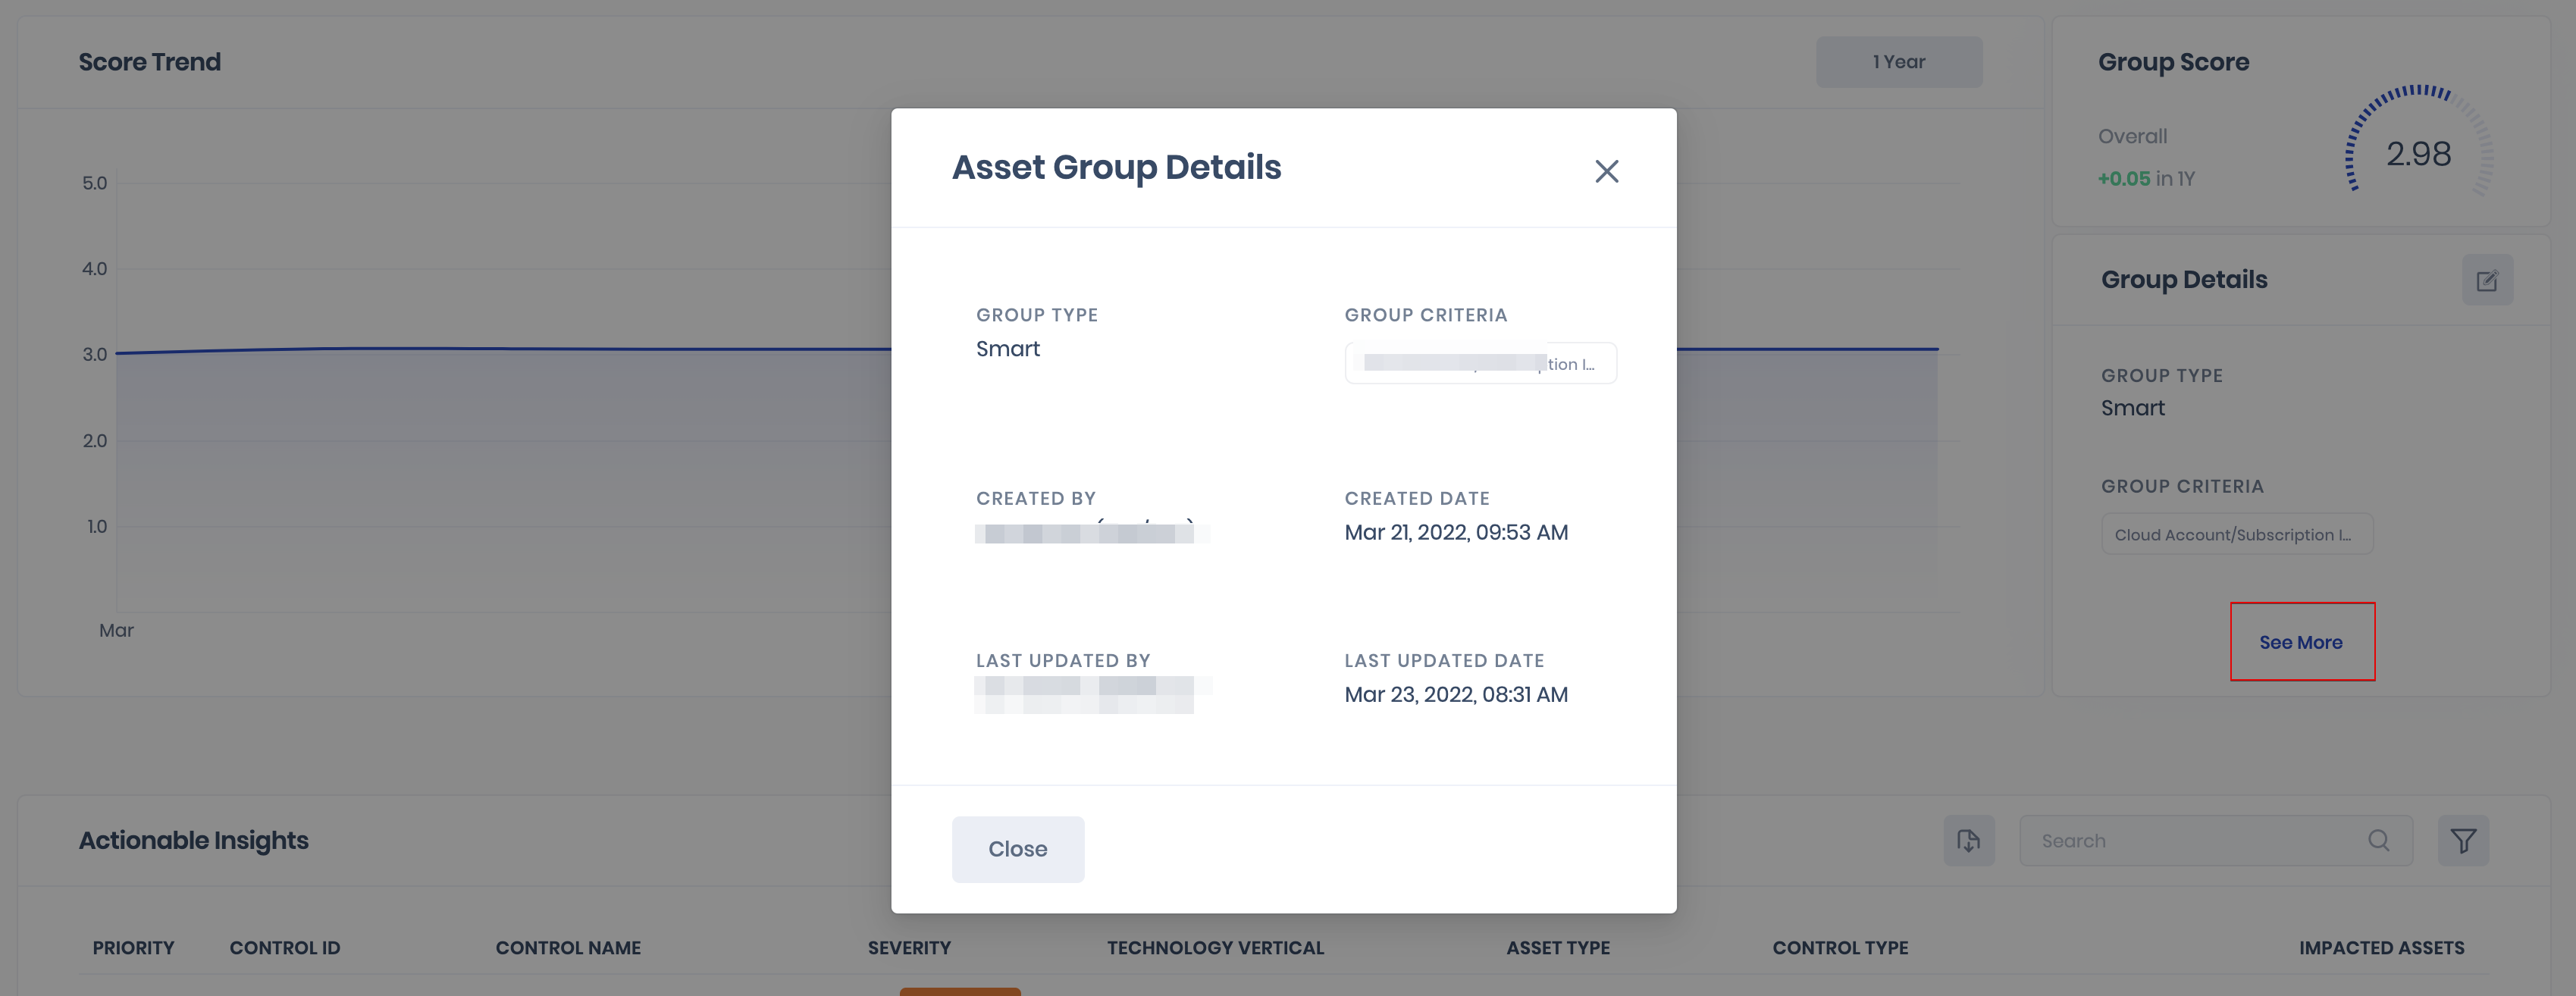 Asset Group Details See more